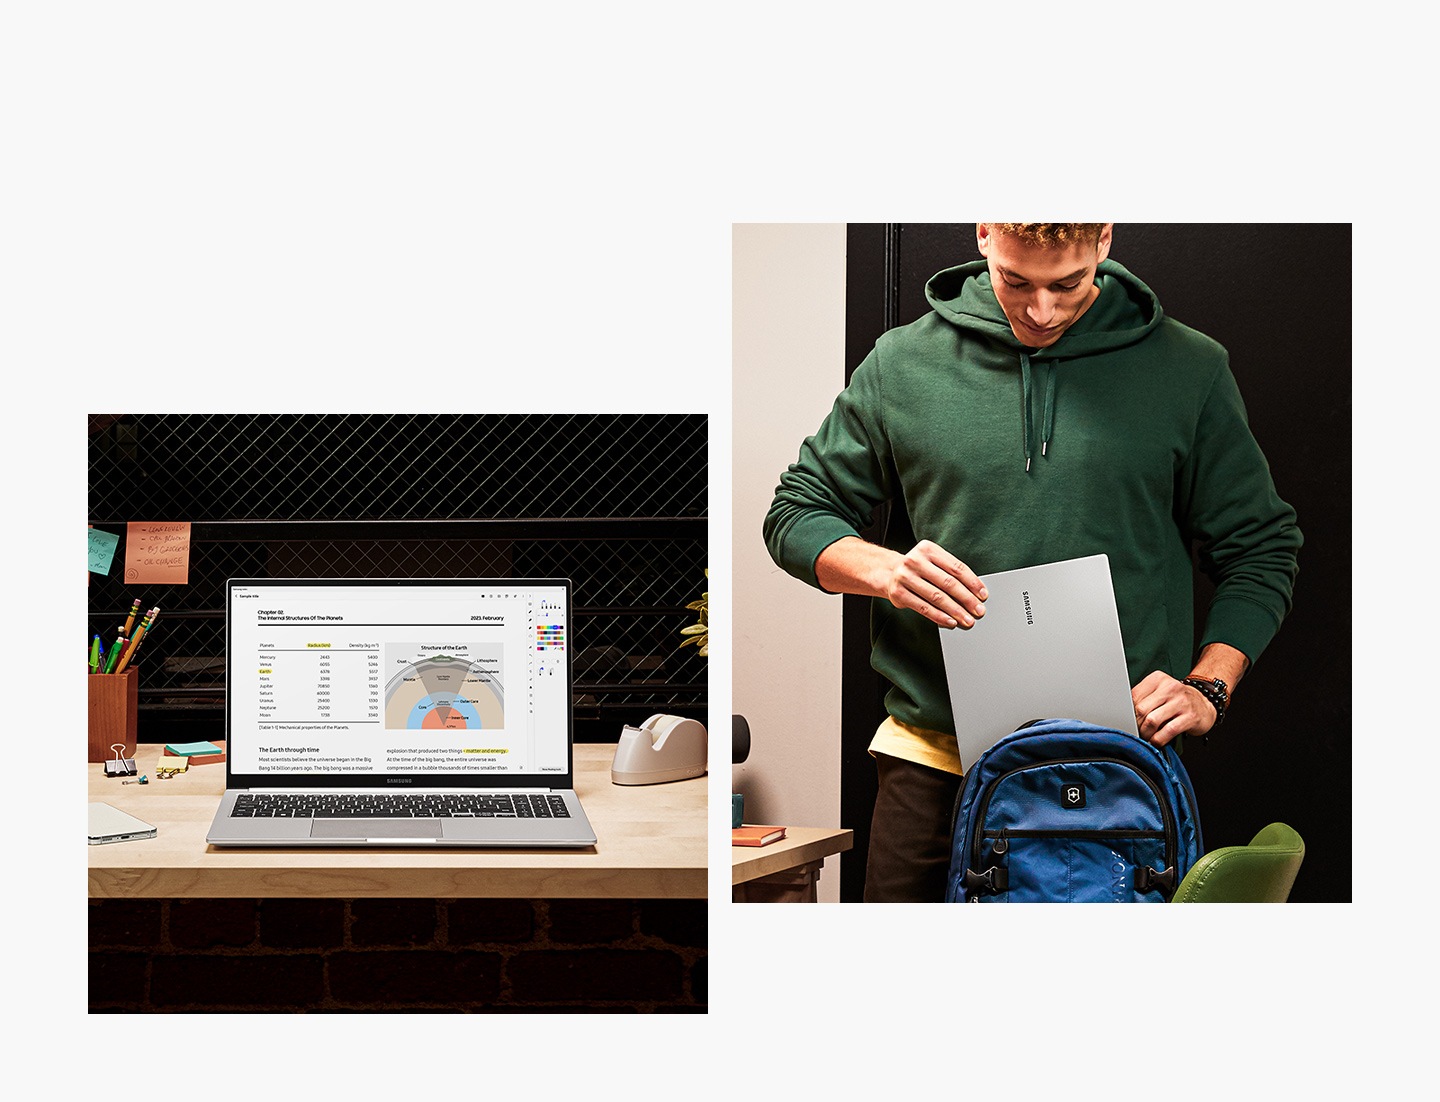 A silver Galaxy Book3 is placed on an office desk, open and facing forward with the Samsung Notes application open onscreen. A young man dressed casually is putting the light and compact silver-colored Galaxy Book3 into his backpack.